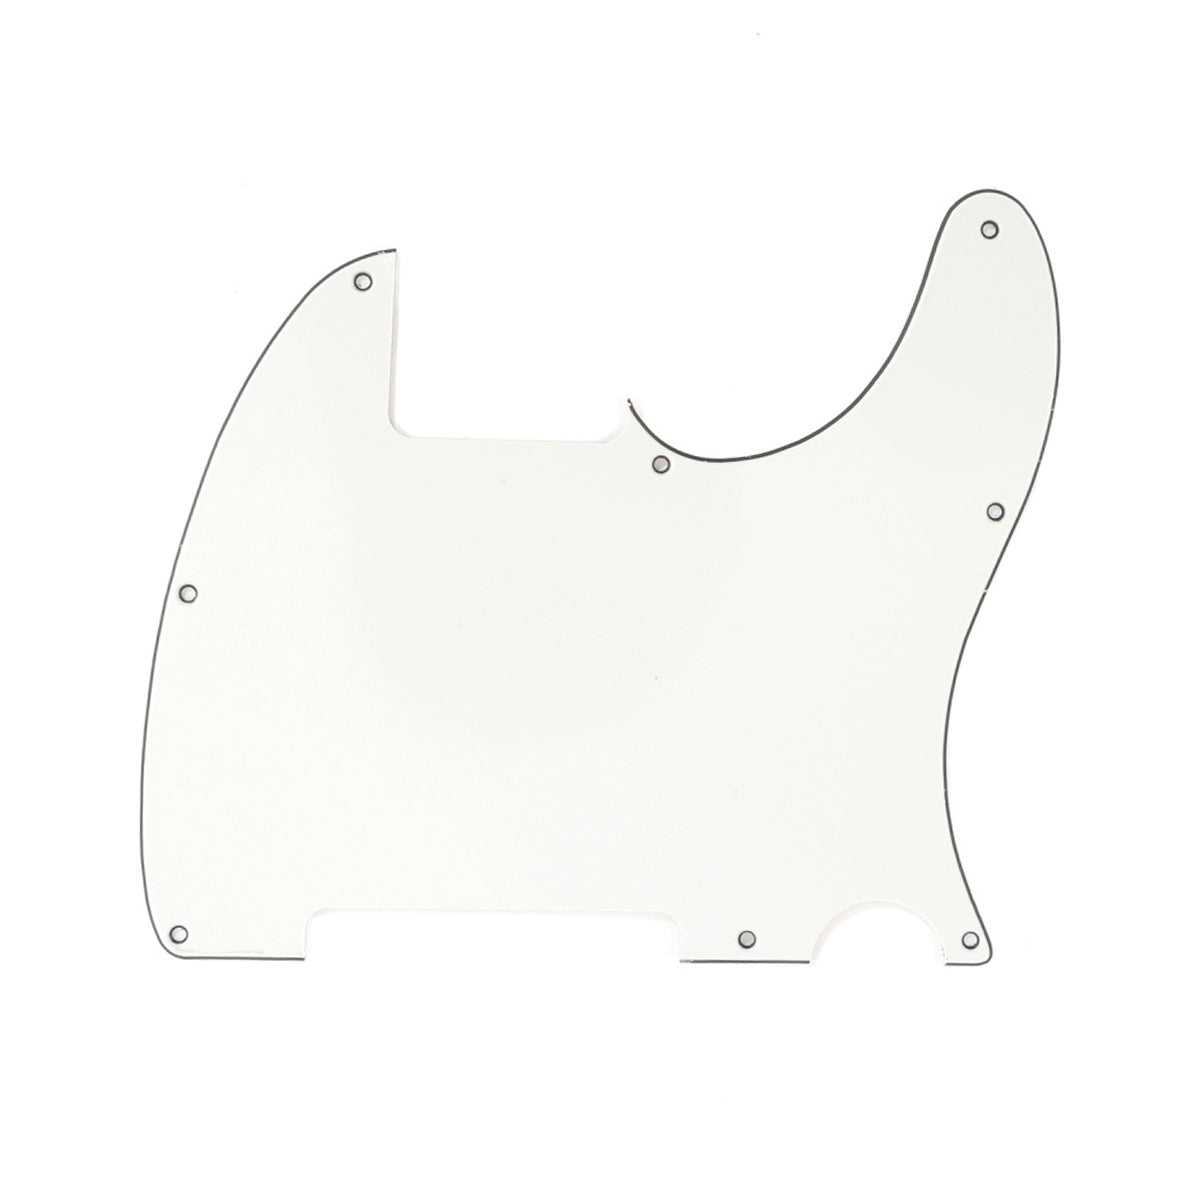 Musiclily 8 Hole Tele Pickguard Blank for Fender USA/Mexican Telecaster Esquire Guitar, 3Ply Parchment